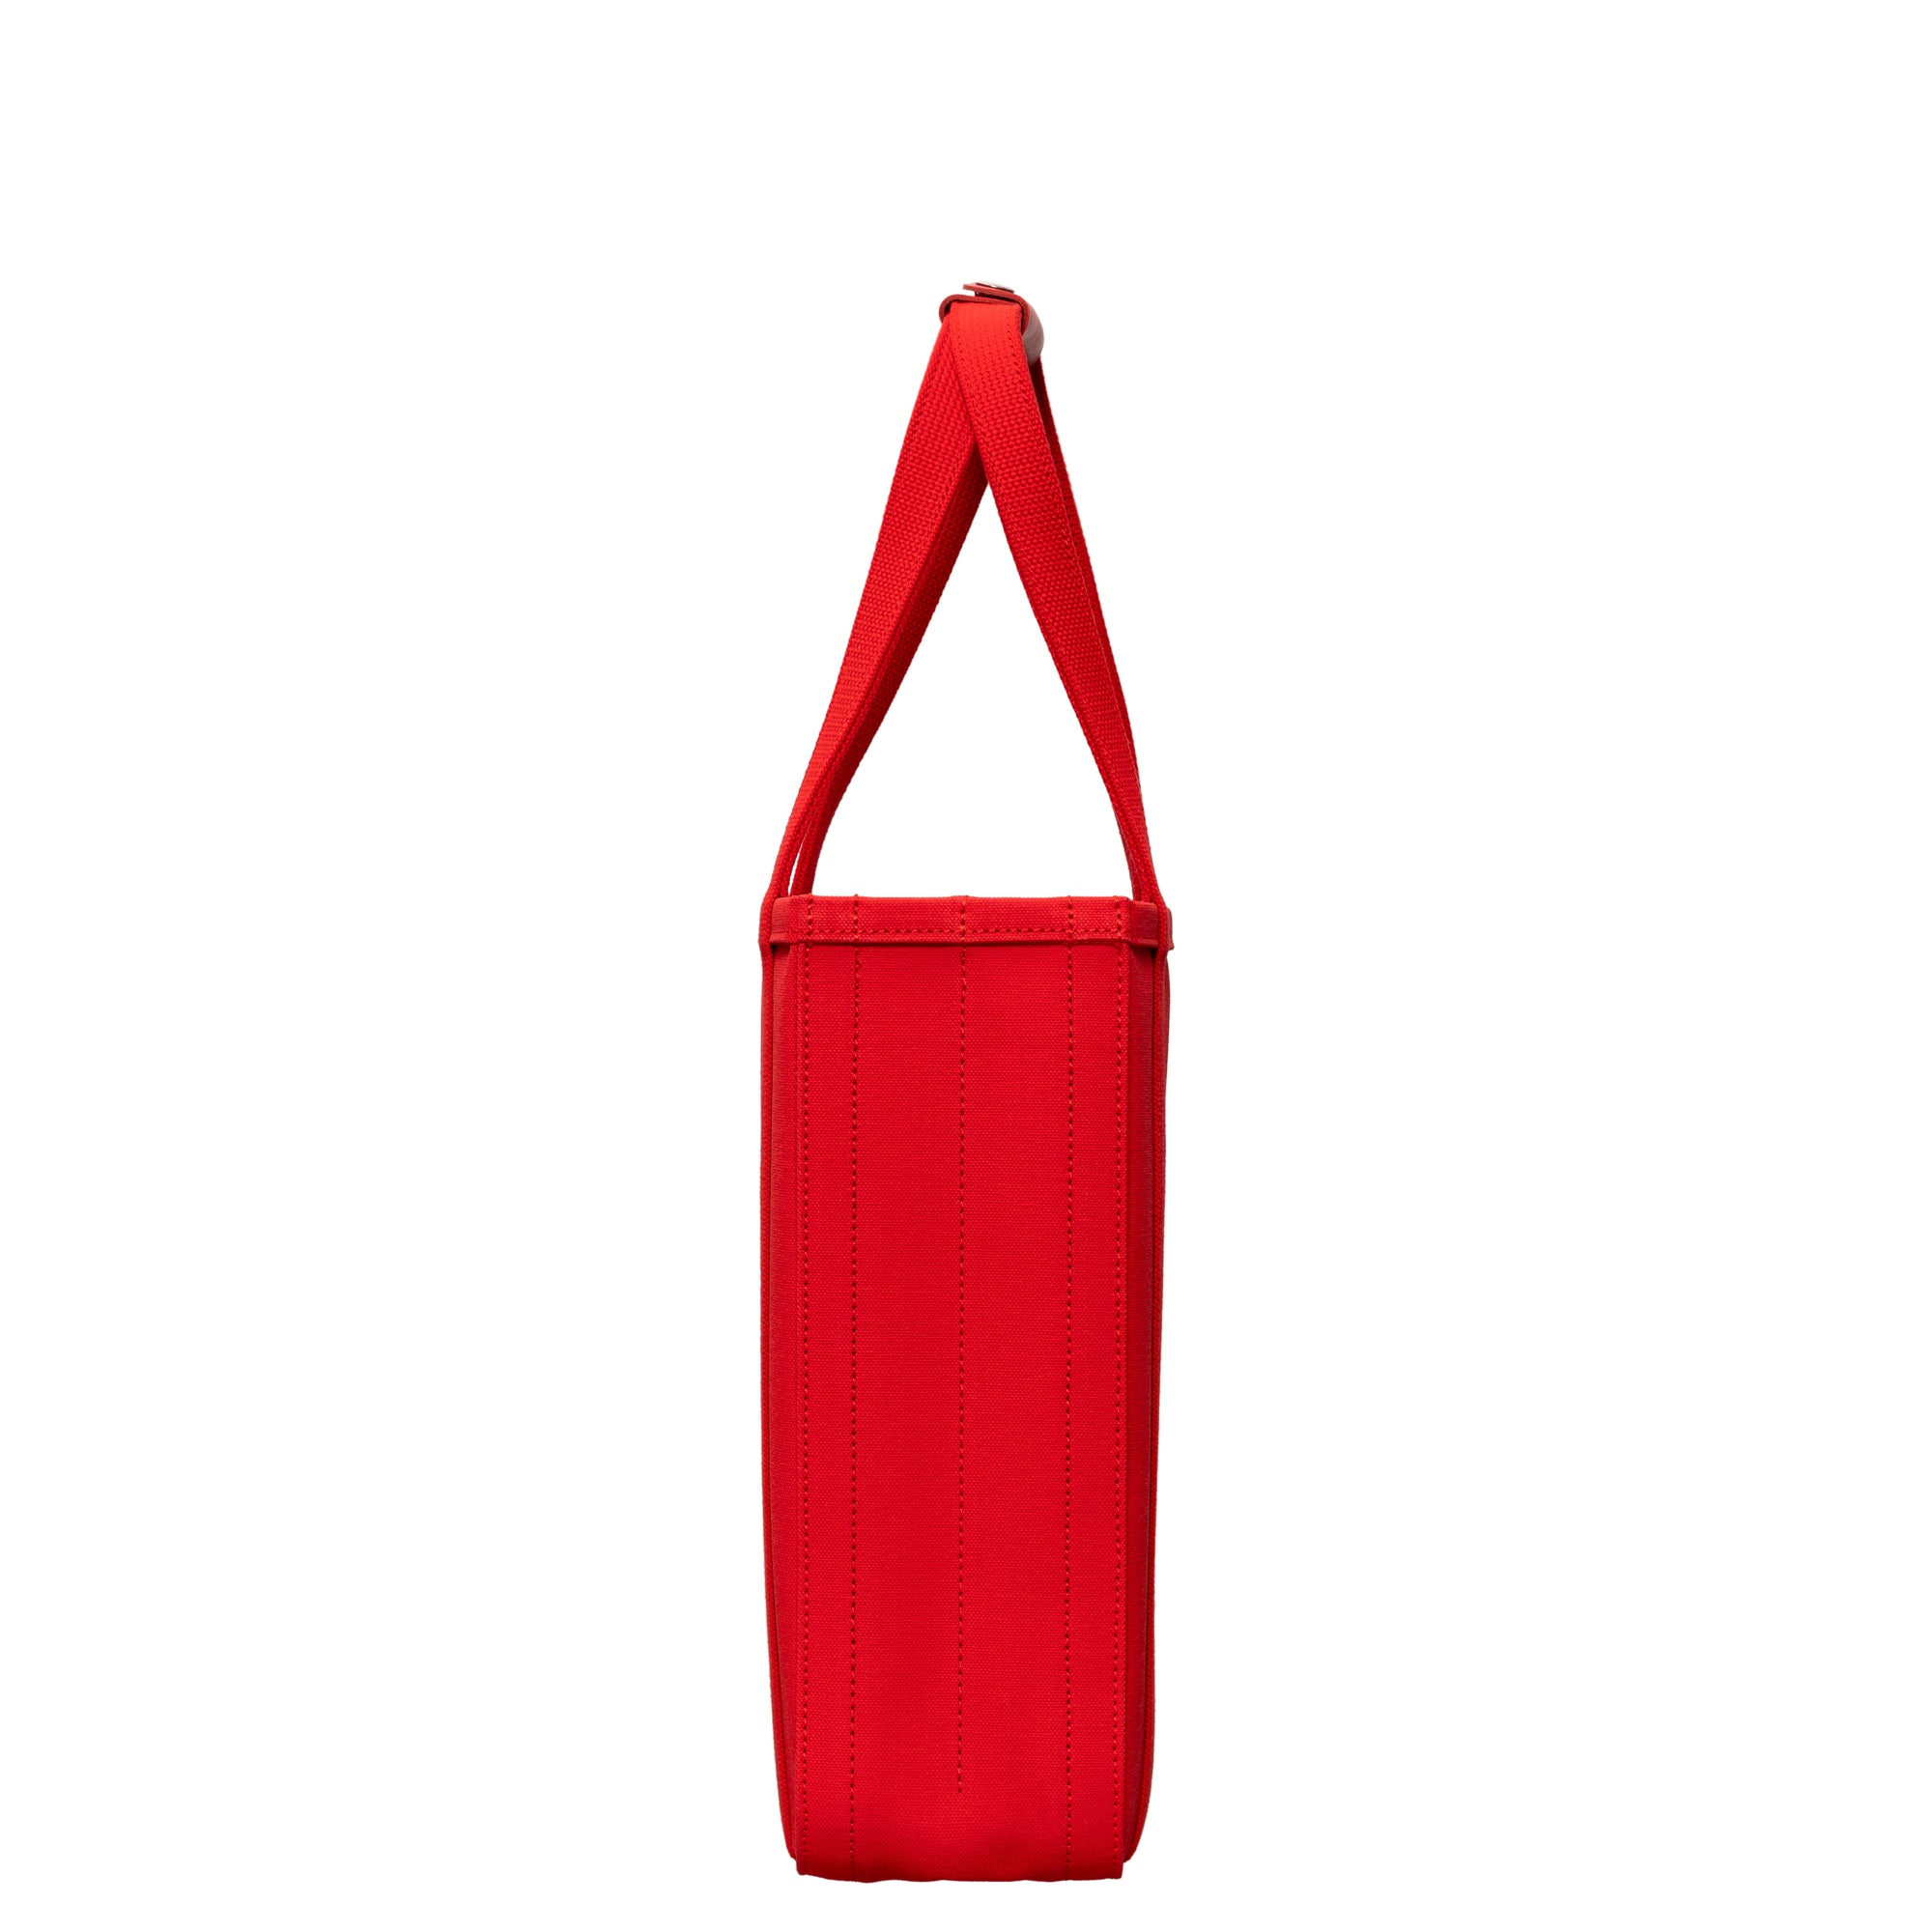 CHACOLI - 04 TOTE W320 X H360 X D120 - (RED) view 2